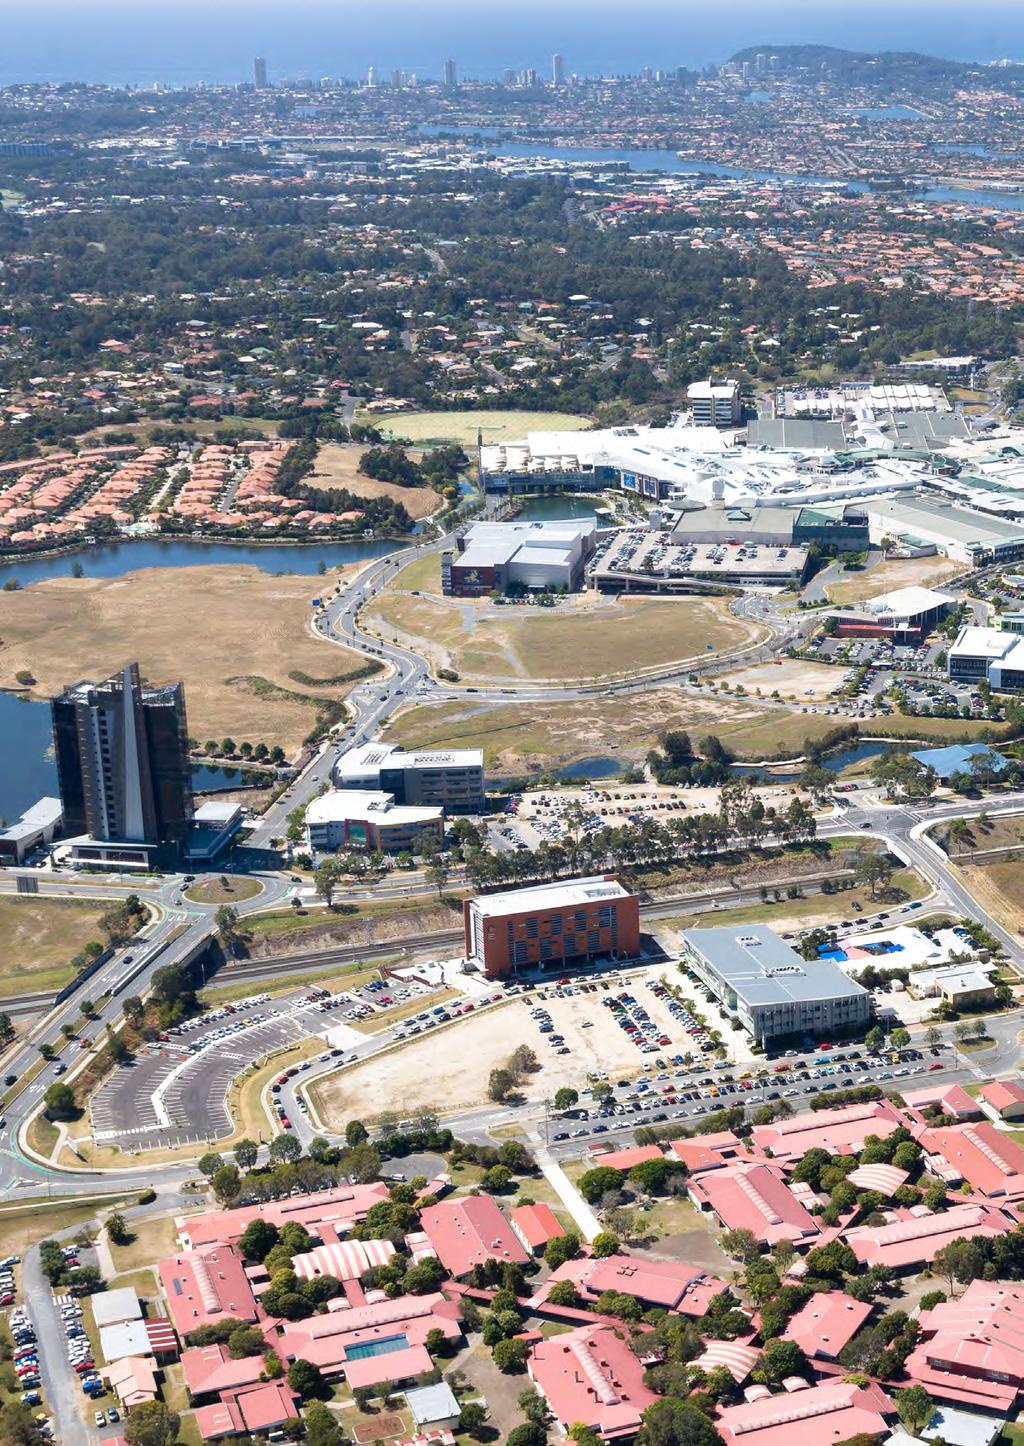 Precinct SNAPSHOTS SOUTHPORT remains the largest office market precinct on the Gold Coast, with 150,620 sqm of stock, although stock levels have increased only slightly since the start of 2010.